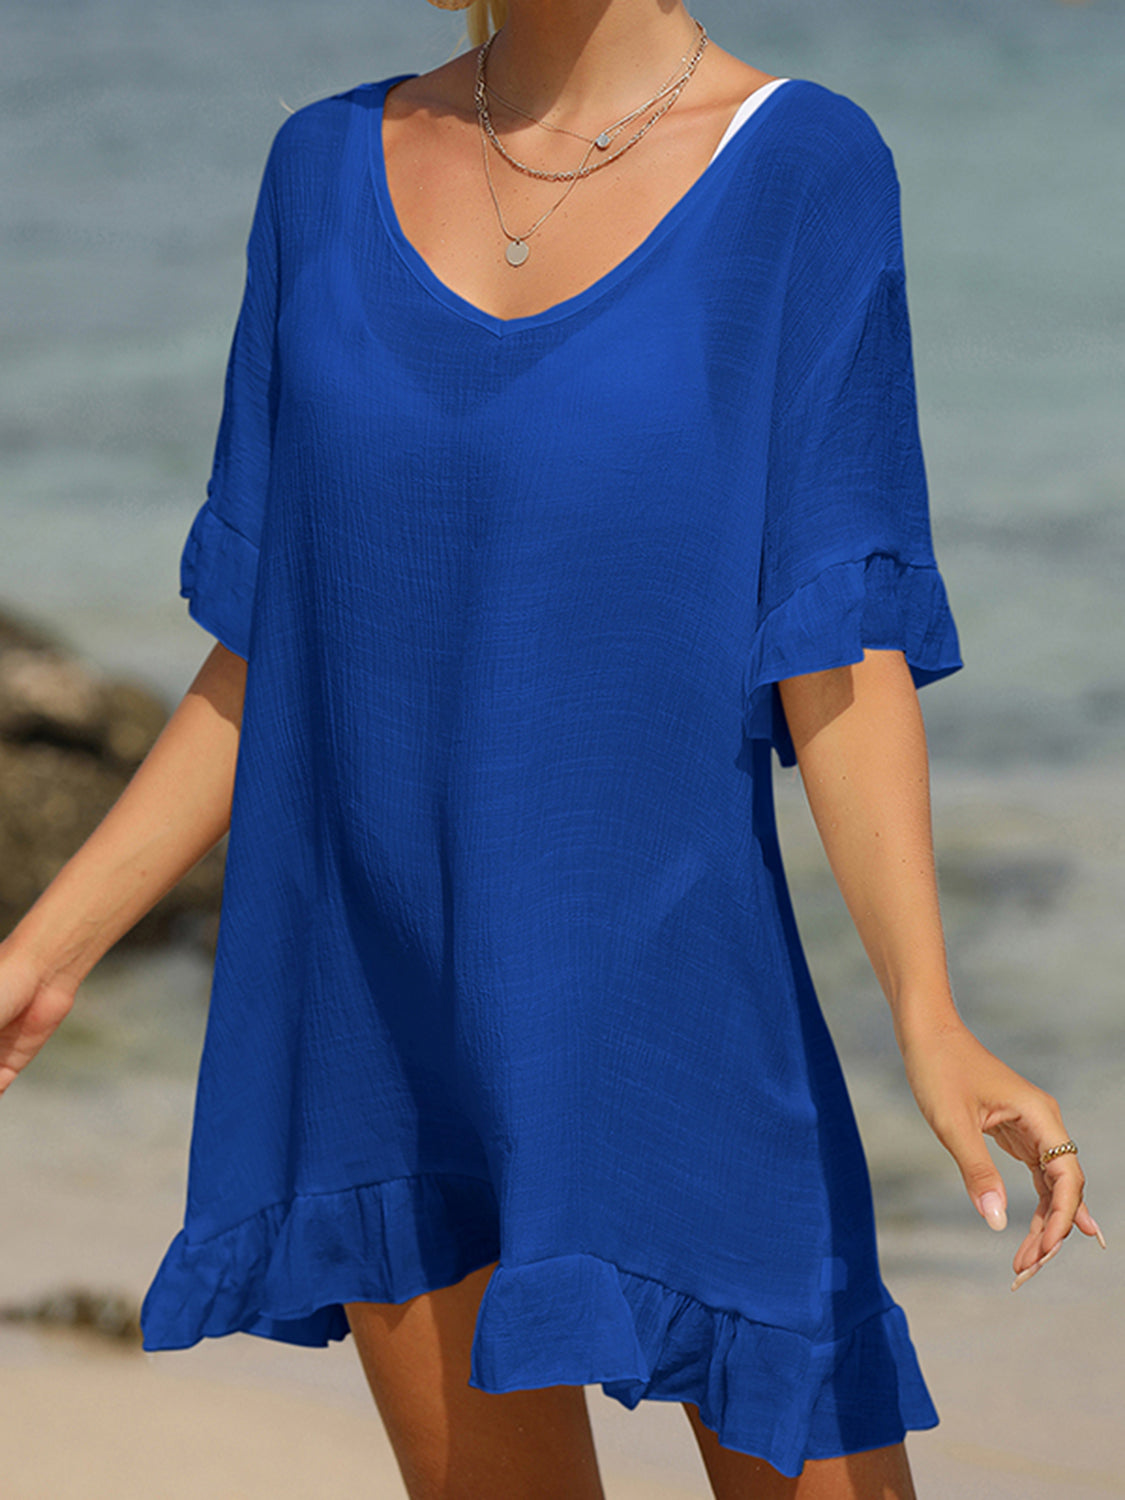 Tied Ruffled Half Sleeve Cover-Up Royal  Blue One Size 